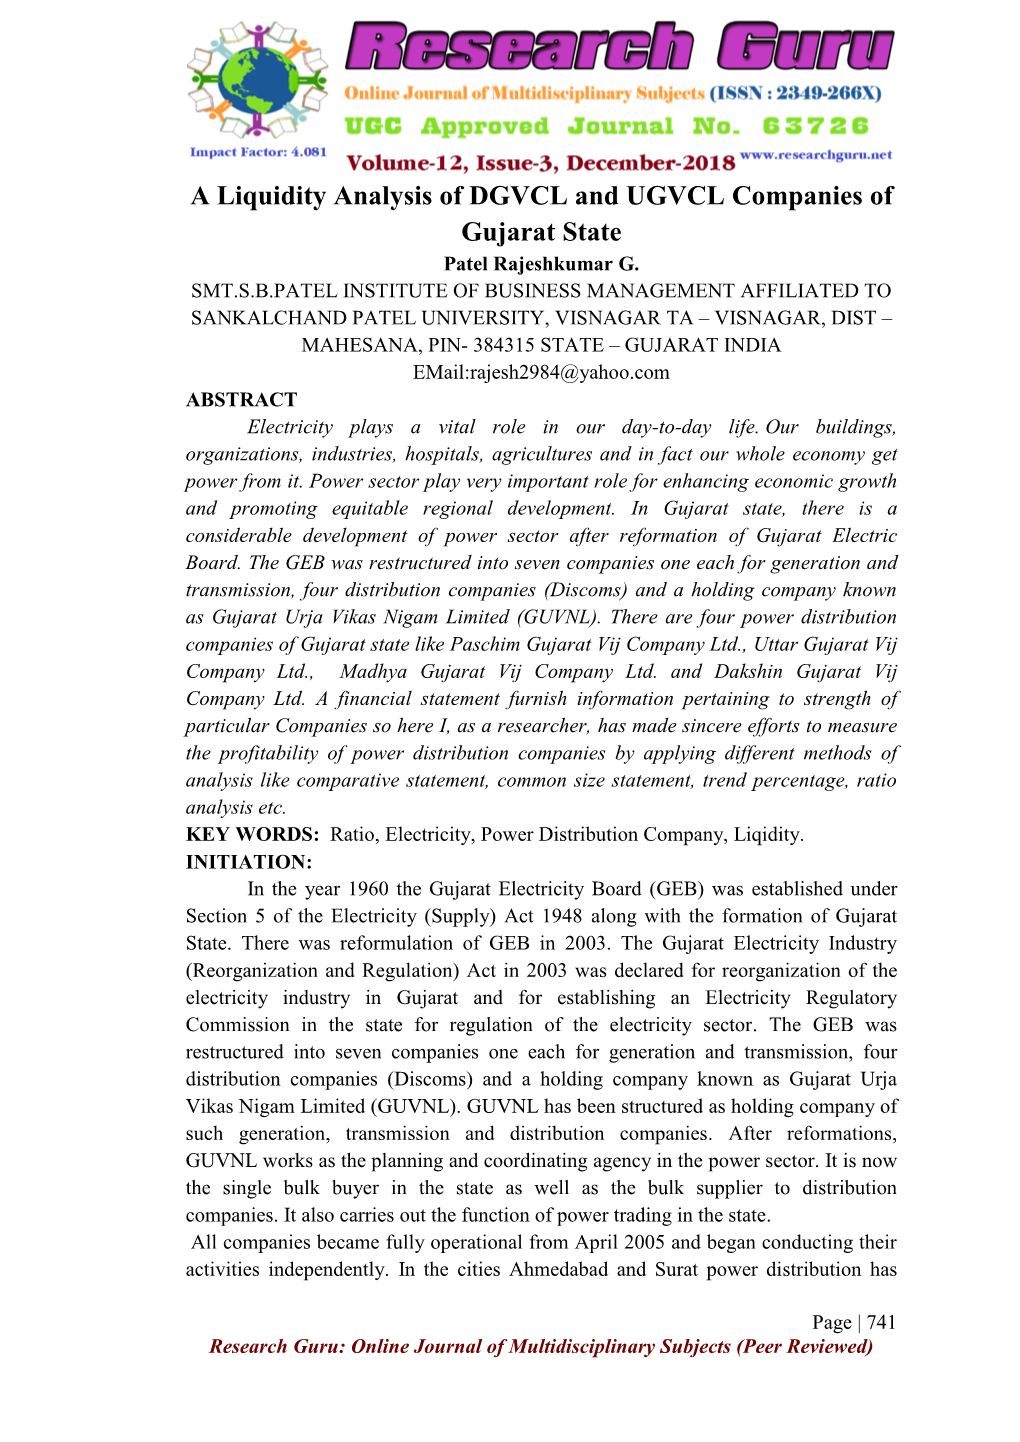 A Liquidity Analysis of DGVCL and UGVCL Companies of Gujarat State Patel Rajeshkumar G